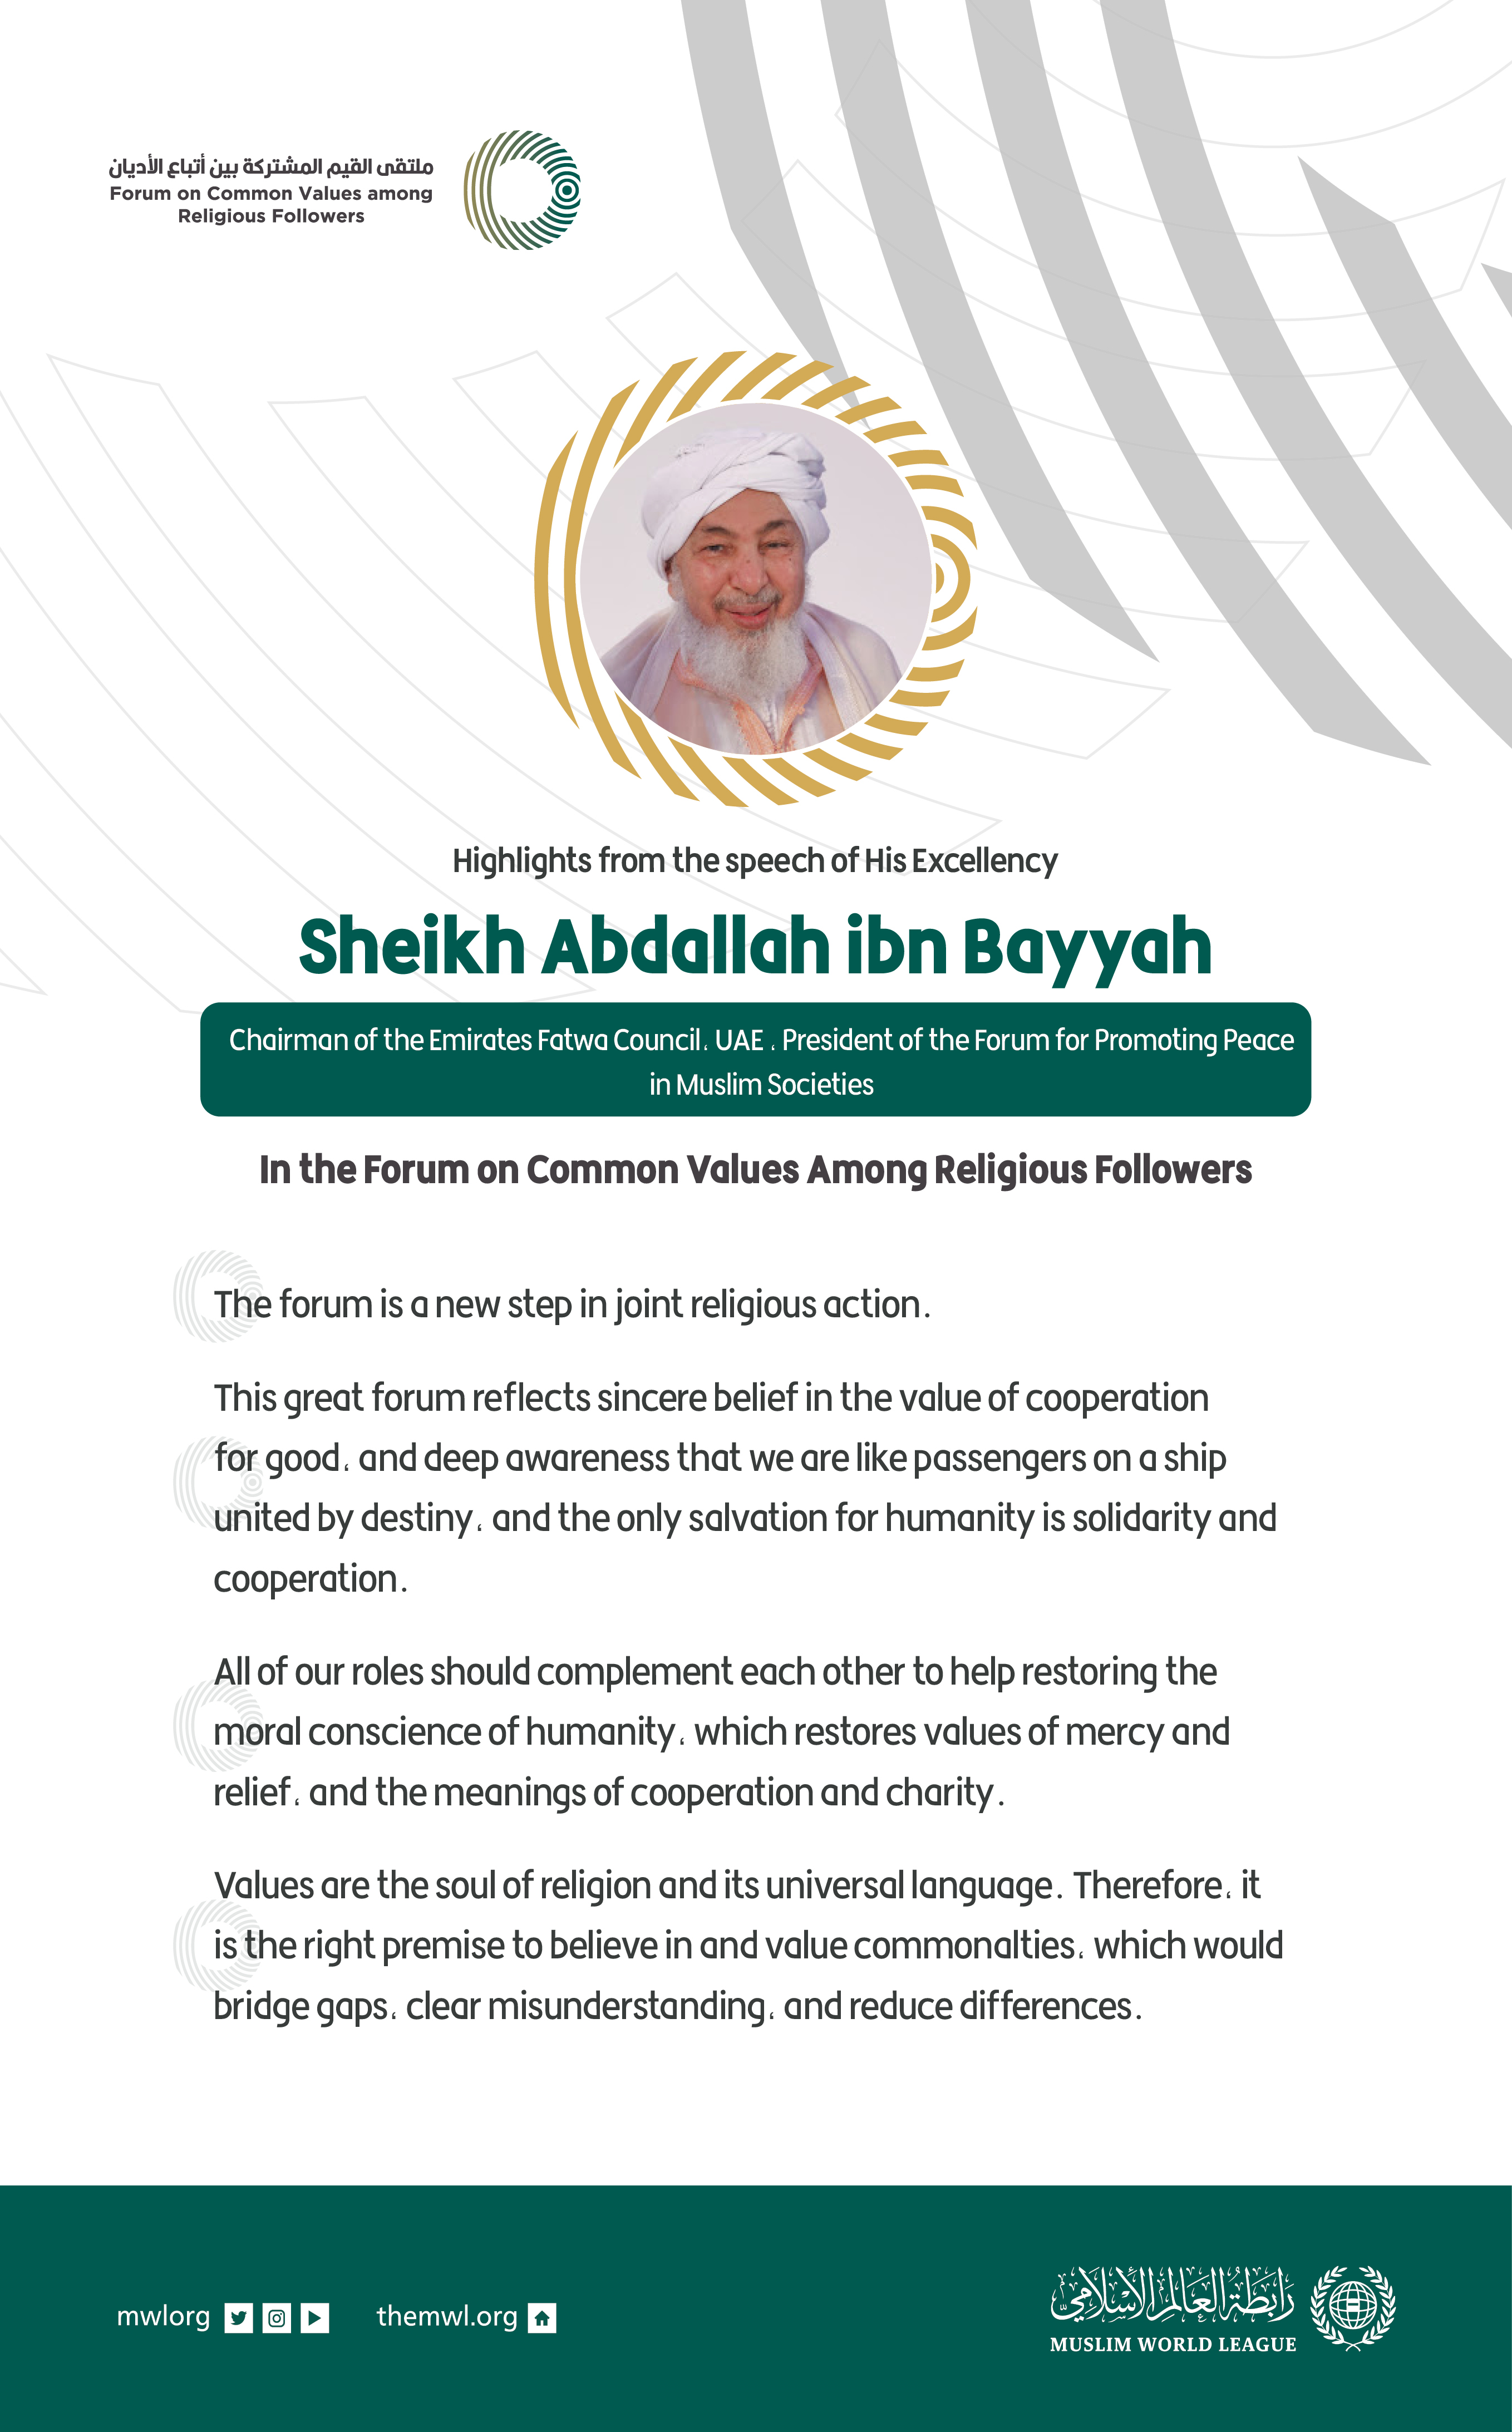 Highlights from the speech of His Excellency, Chairman of the Emirates Fatwa Council, UAE, Sheikh Abdallah ibn Bayyah in the Forum on Common Values Among Religious Followers in Riyadh:  Faiths For Peace